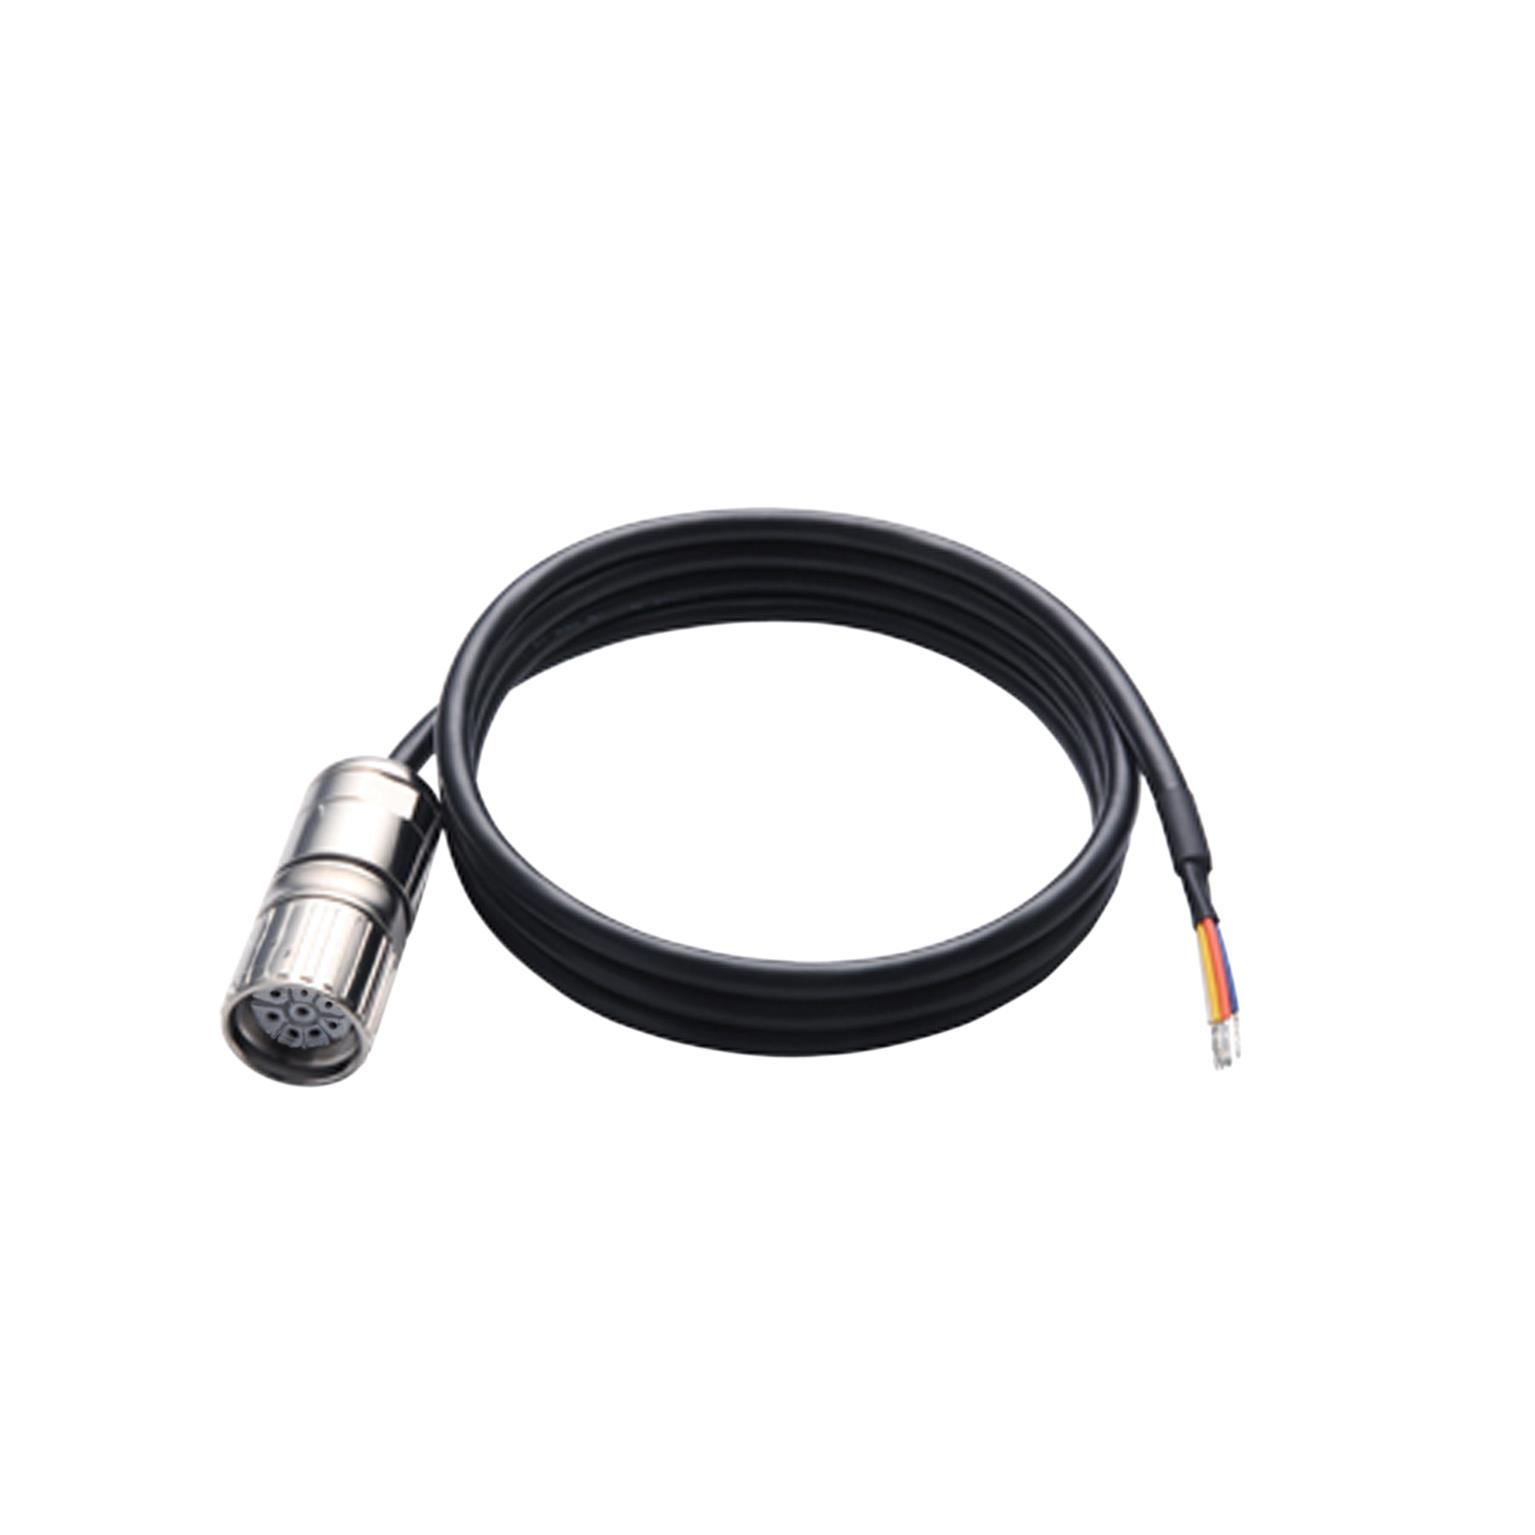 【VW3M5501R30】BMP POWER CABLE, 16 AWG, ONE END